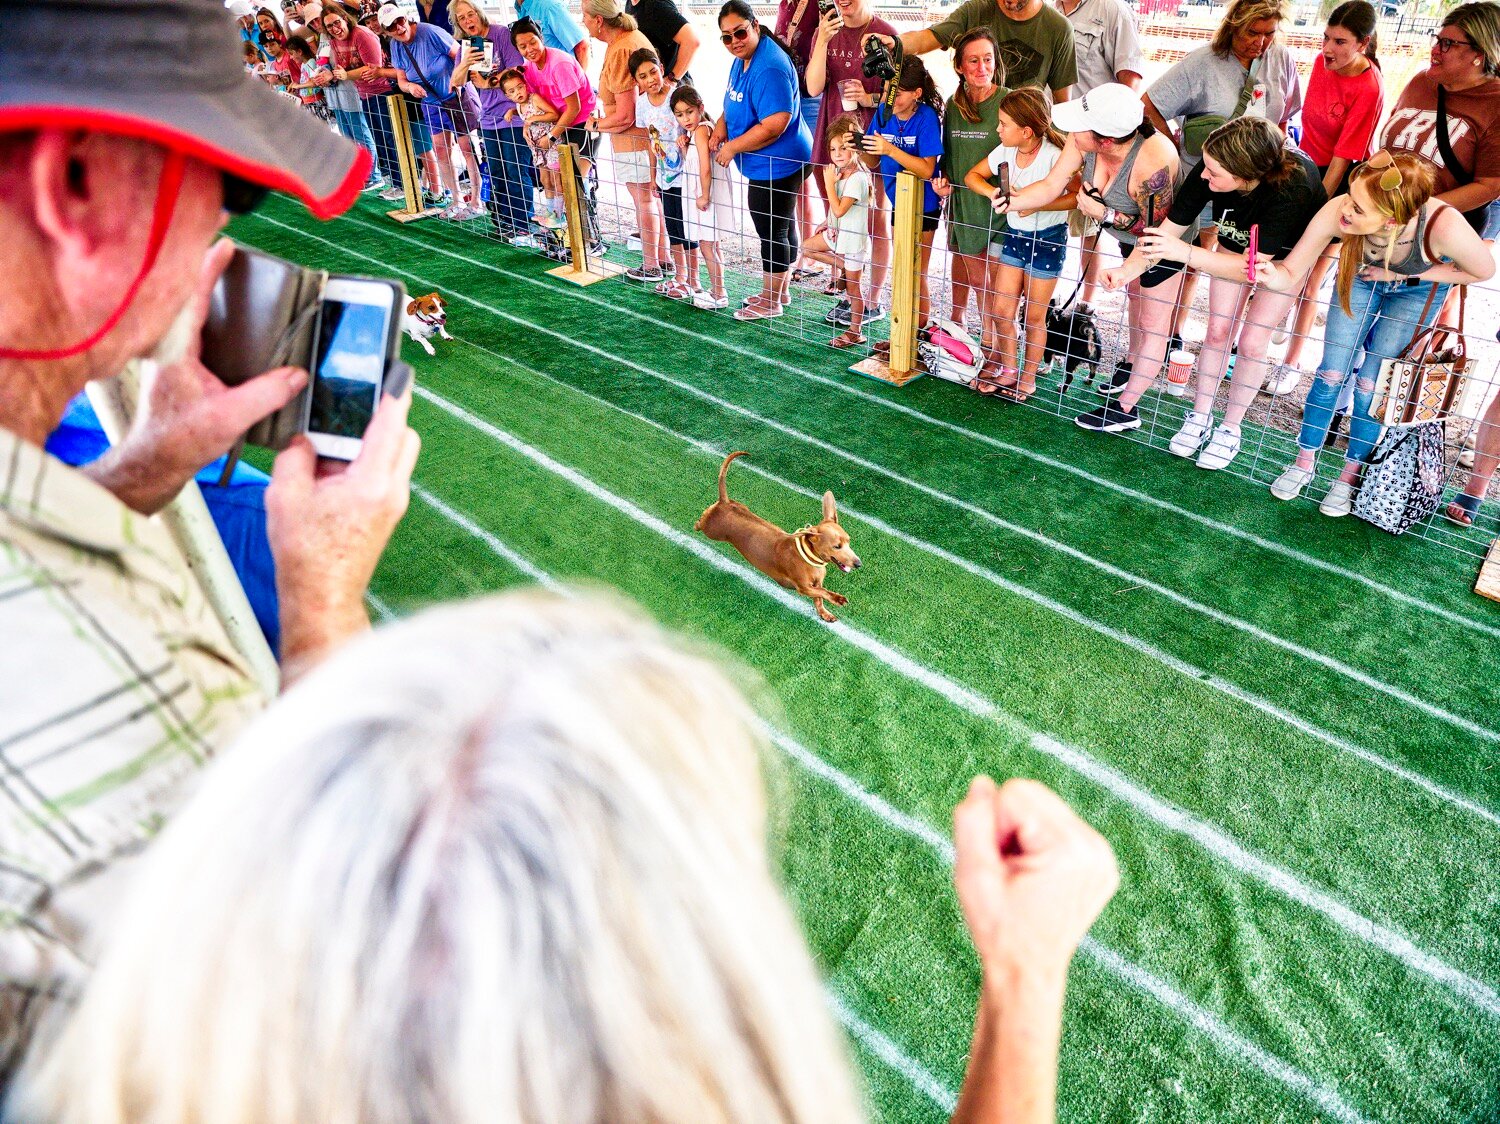 Whether casual onlookers or intense competitors, everyone has a rooting interest in the annual races at Weenie Dog Downs. [additional iron horse images available]